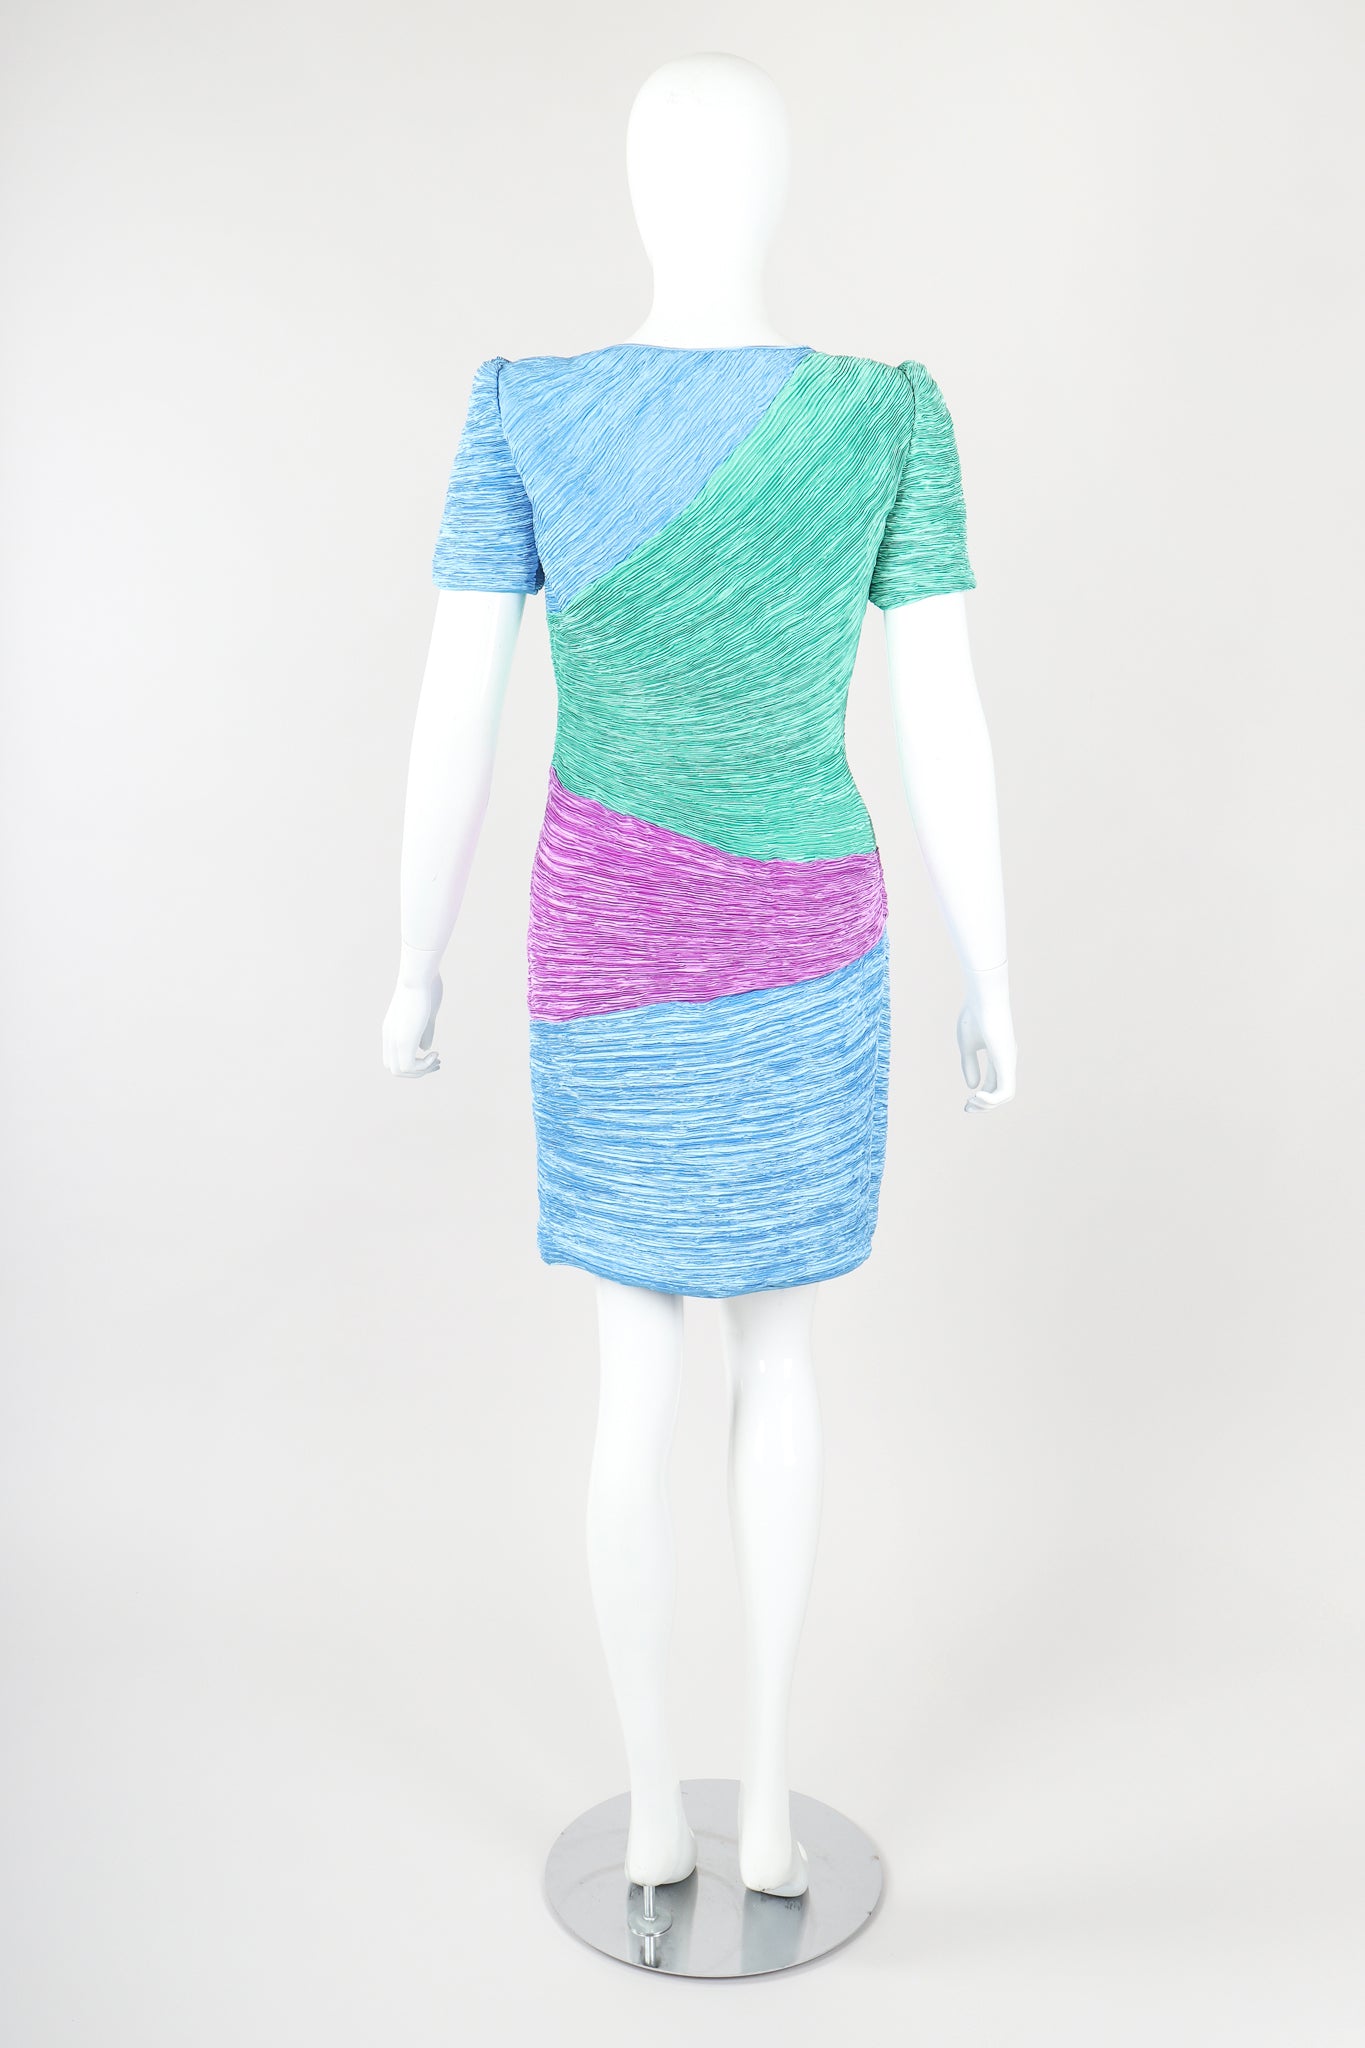 Recess Designer Consignment Vintage Mary McFadden Pleated Colorblock Cocktail Dress Los Angeles Resale Mariano Fortuny